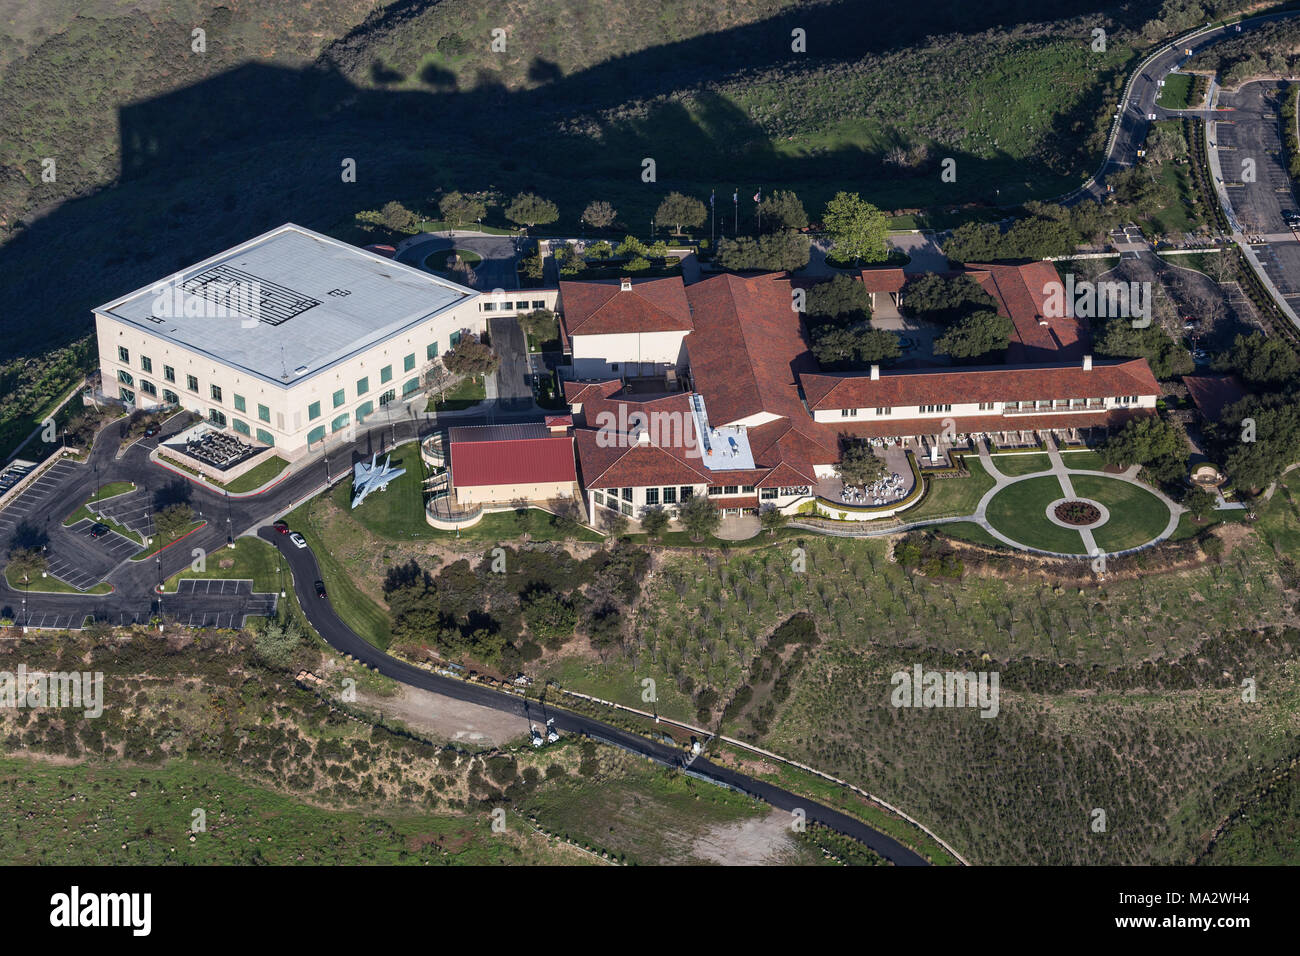 Simi Valley, California, USA - March 26, 2018:  Aerial view of Ronald Reagan Presidential Library and Center for Public Affairs. Stock Photo